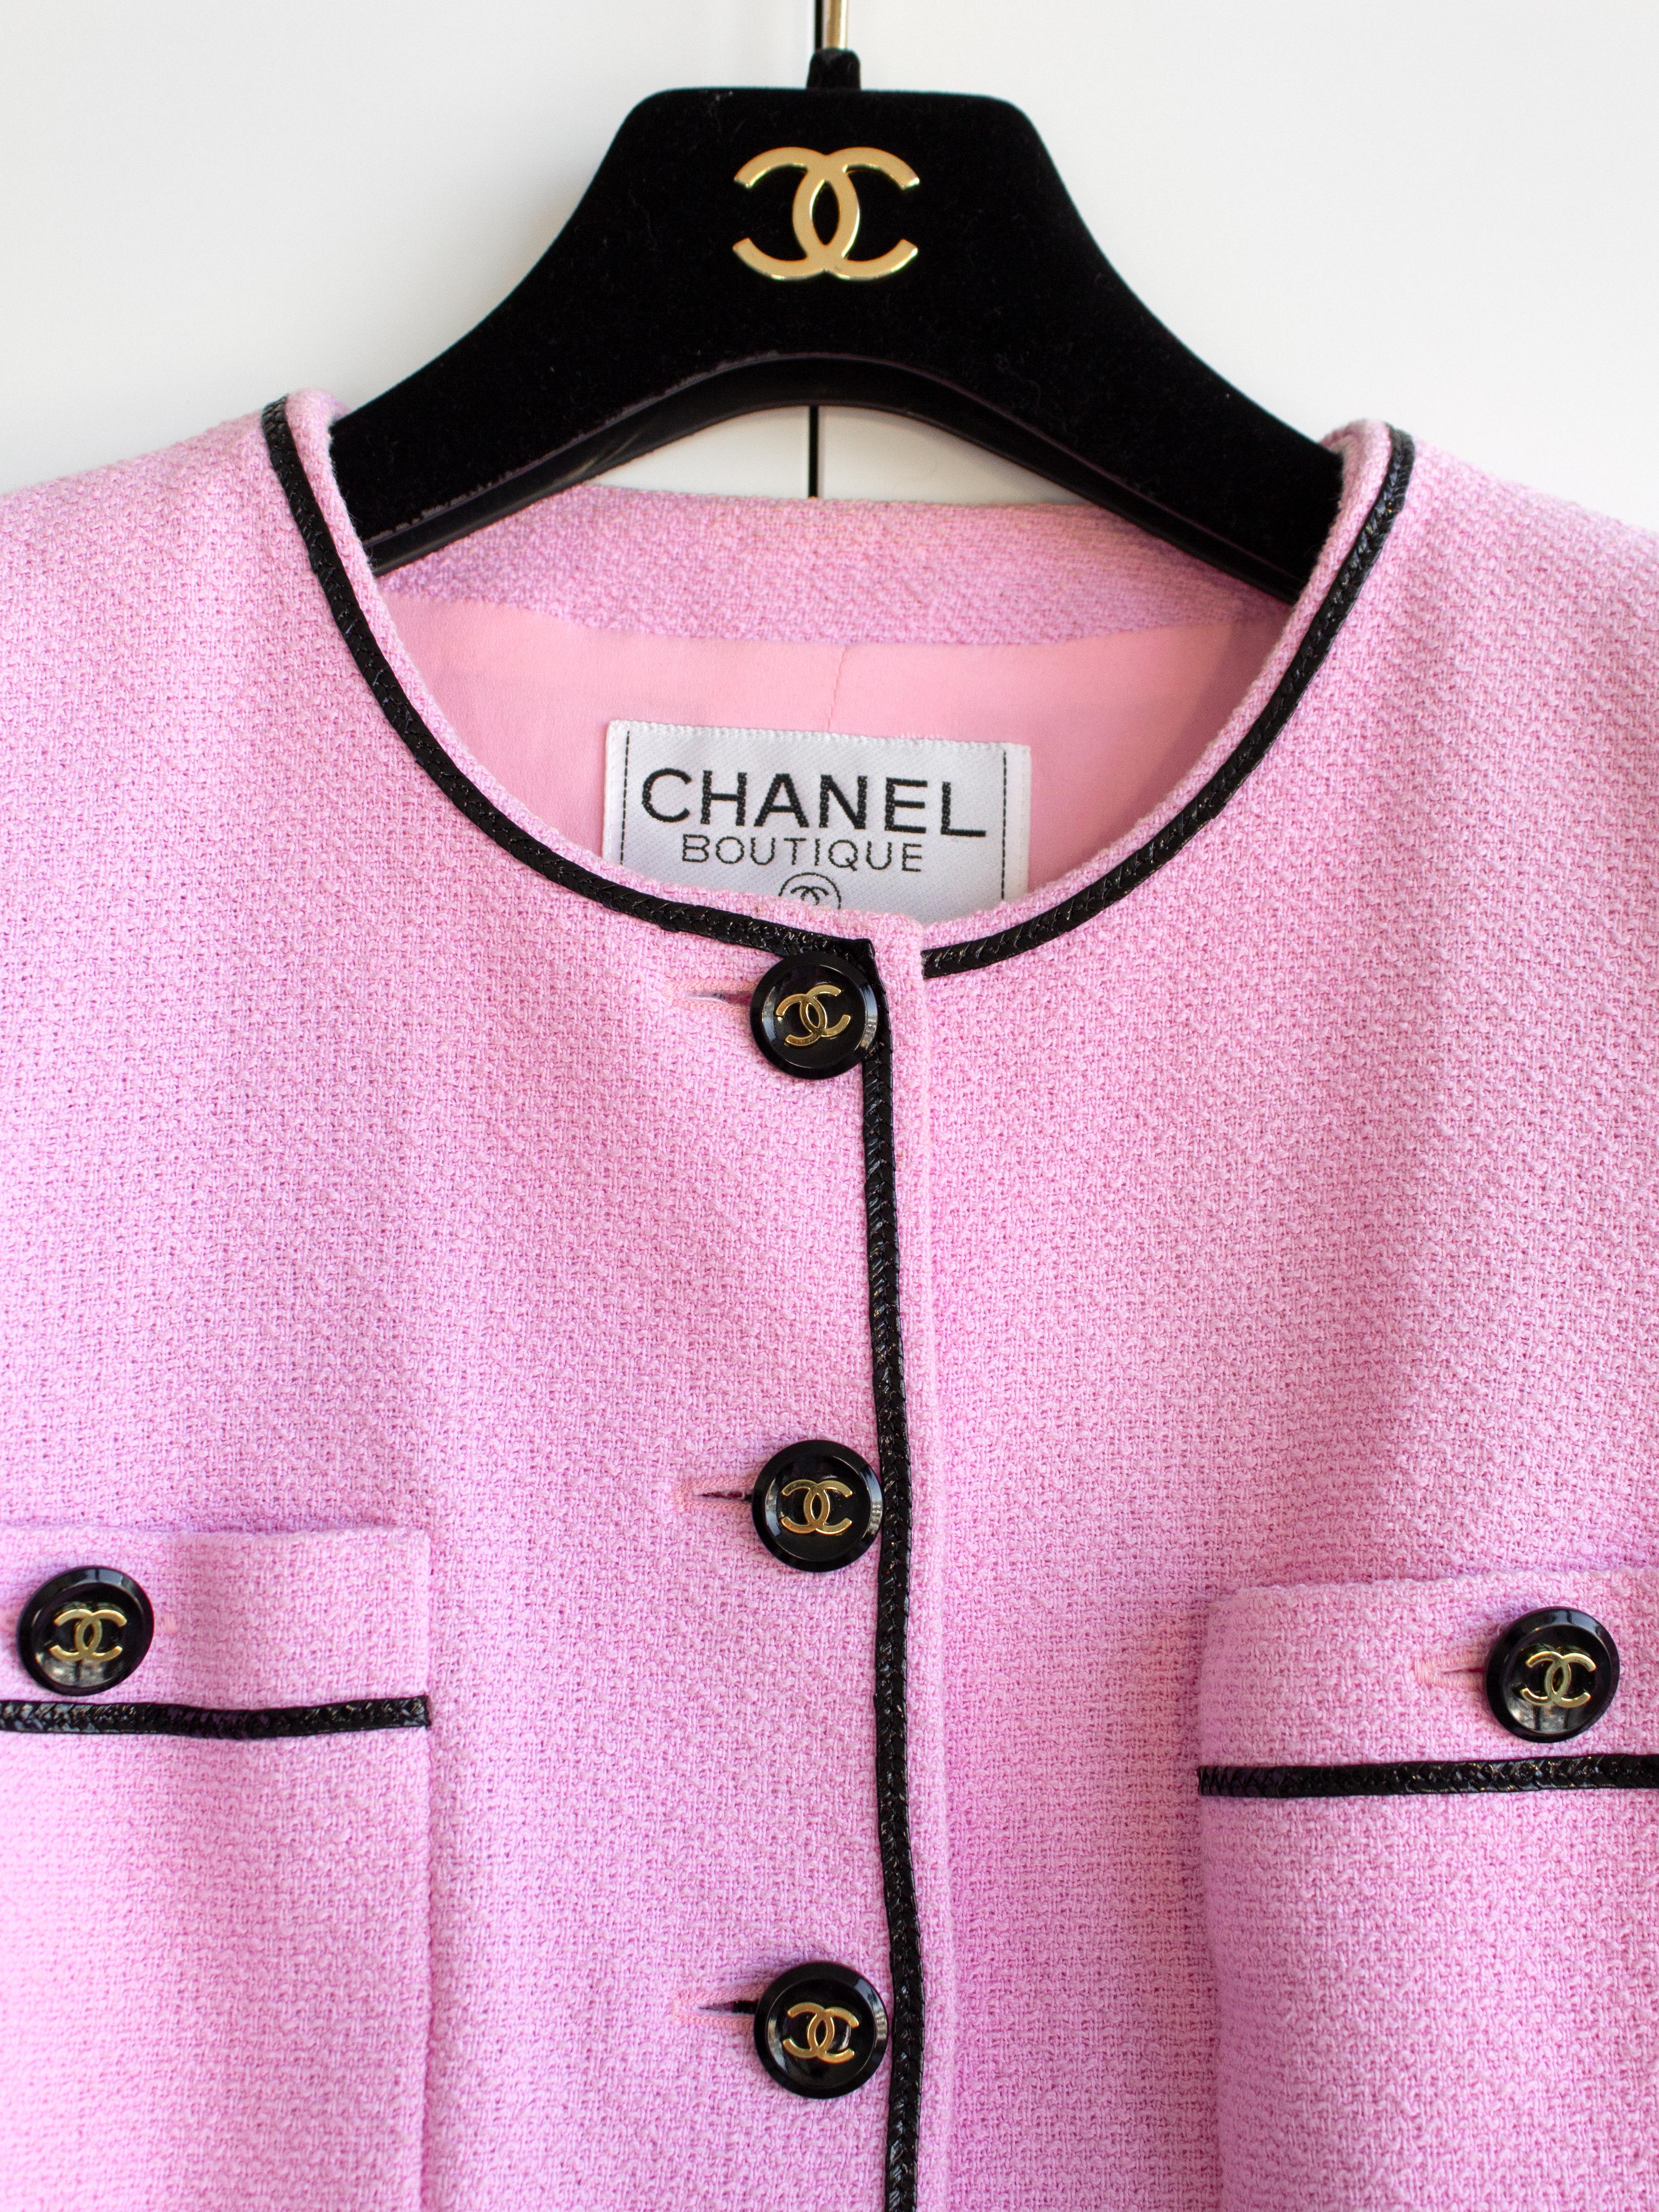 Iconic Chanel Vintage S/S 1995 Barbie Cropped Pink Black 95P Jacket Corset Skirt 4